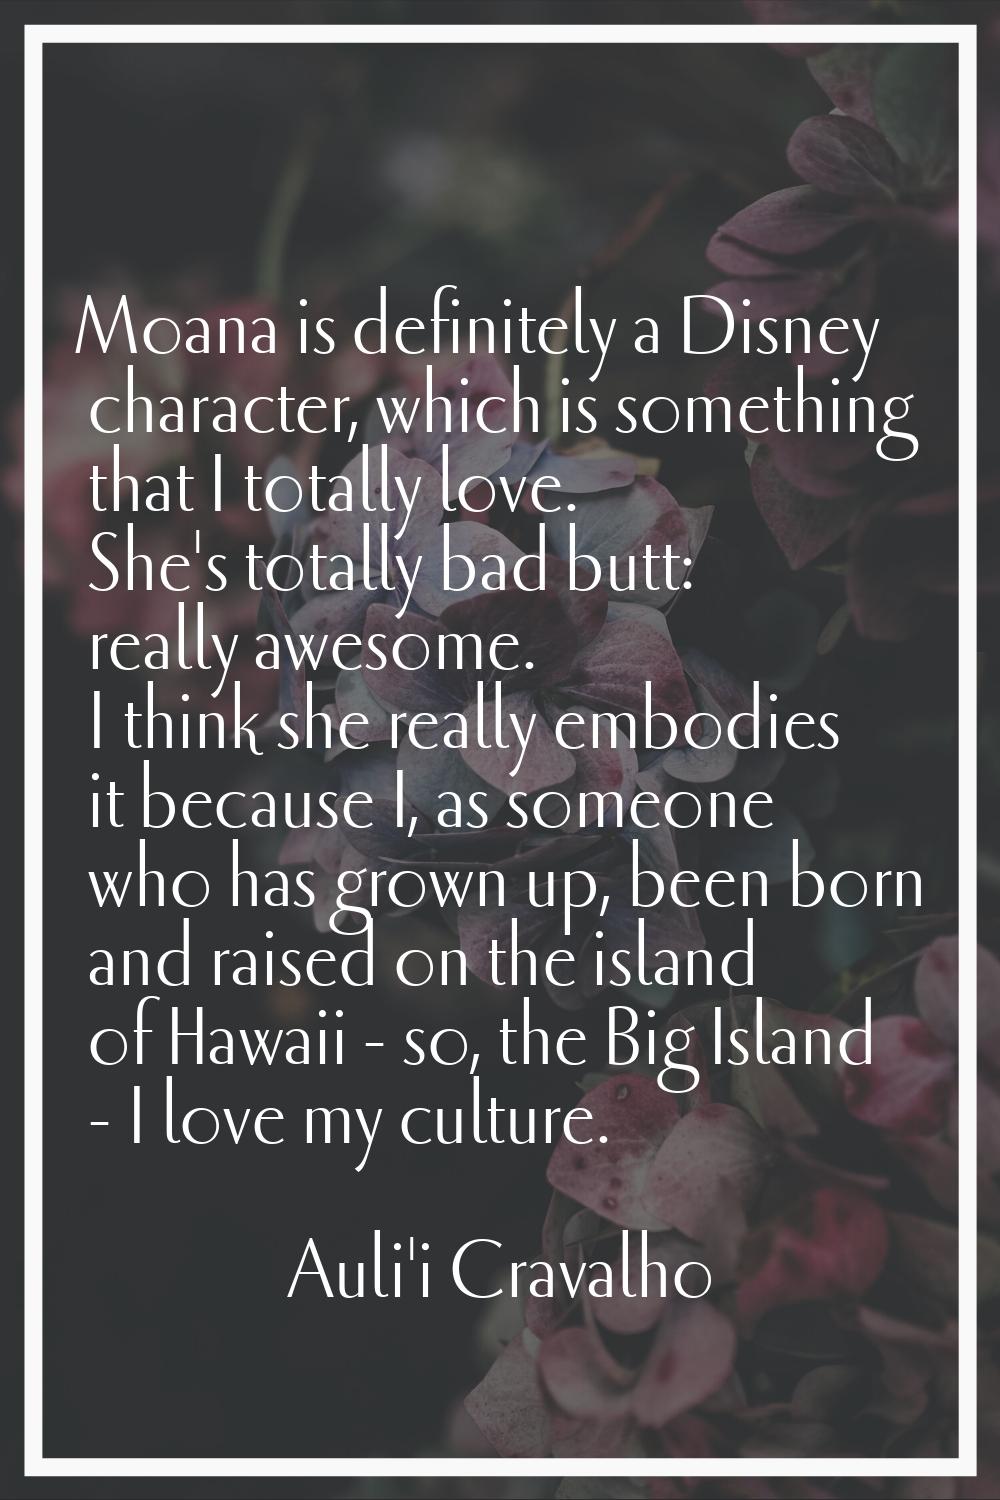 Moana is definitely a Disney character, which is something that I totally love. She's totally bad b